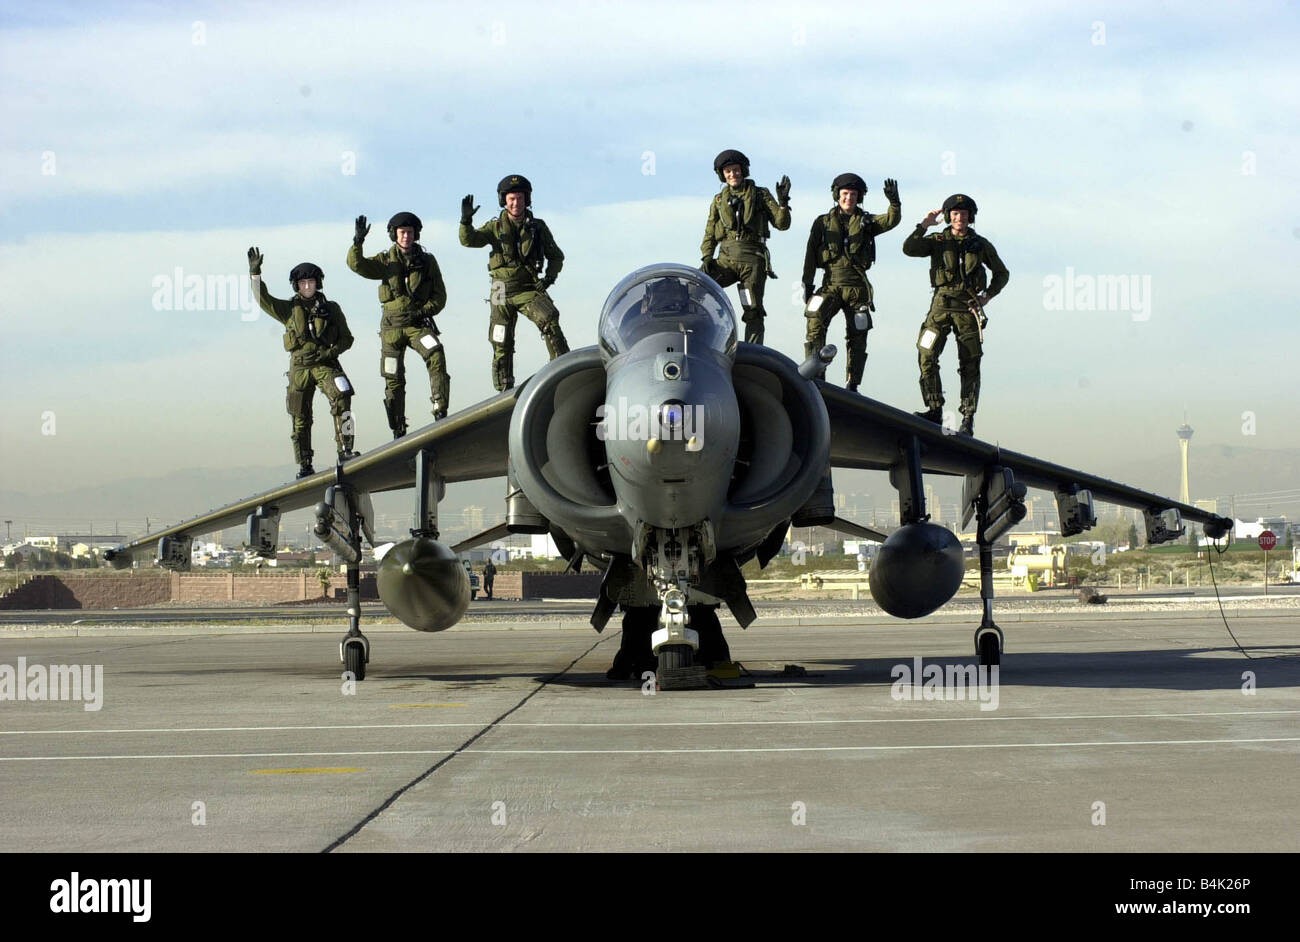 Harrier pilots from 1 Squadron Mrch 2001 get ready for Mock war at Red Flag in the Nevada USA FROM LEFT ARE FLT LT PAUL LAUGHARNE SDN LDR GARY WATERFALL WNG CMDR SEAN BELL FLT LT AARON LAUDER FLT LT MARK GREEN AND FLT LT CHRIS AVERTY LFEY003 Flight100 Stock Photo